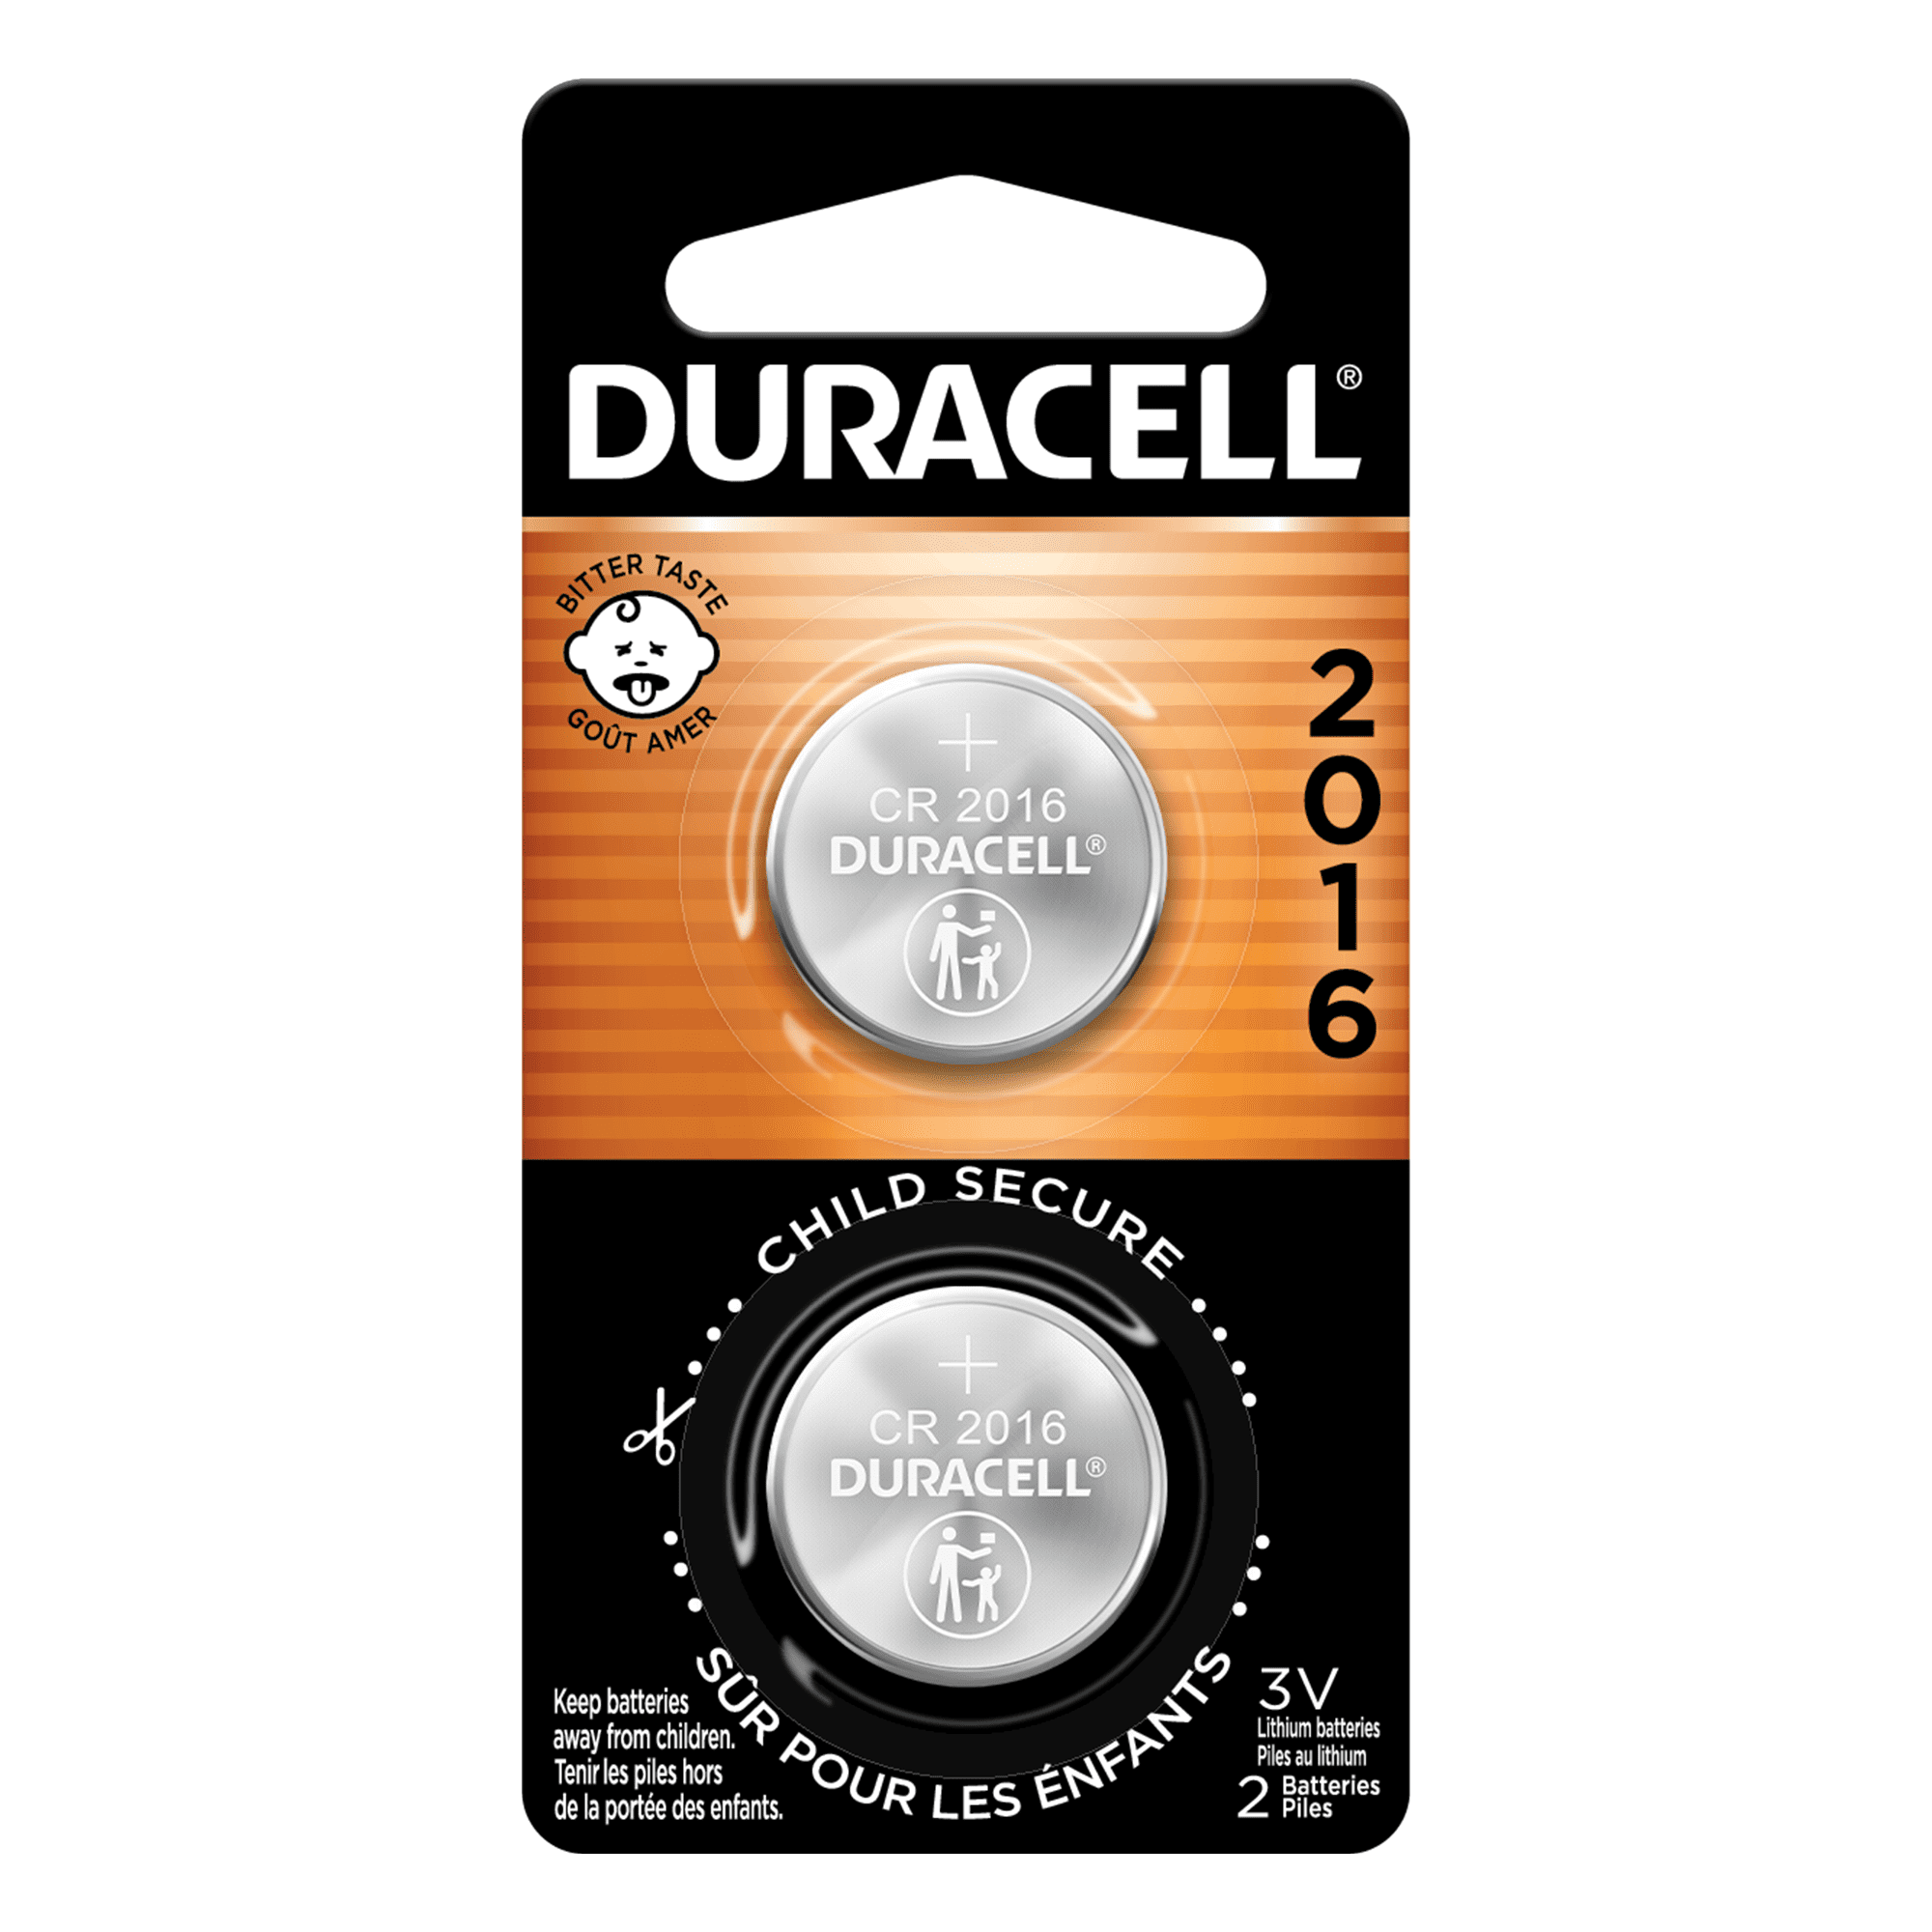 Duracell 2016 Lithium Coin Battery 3V, Bitter Coating Discourages  Swallowing, 2 Pack